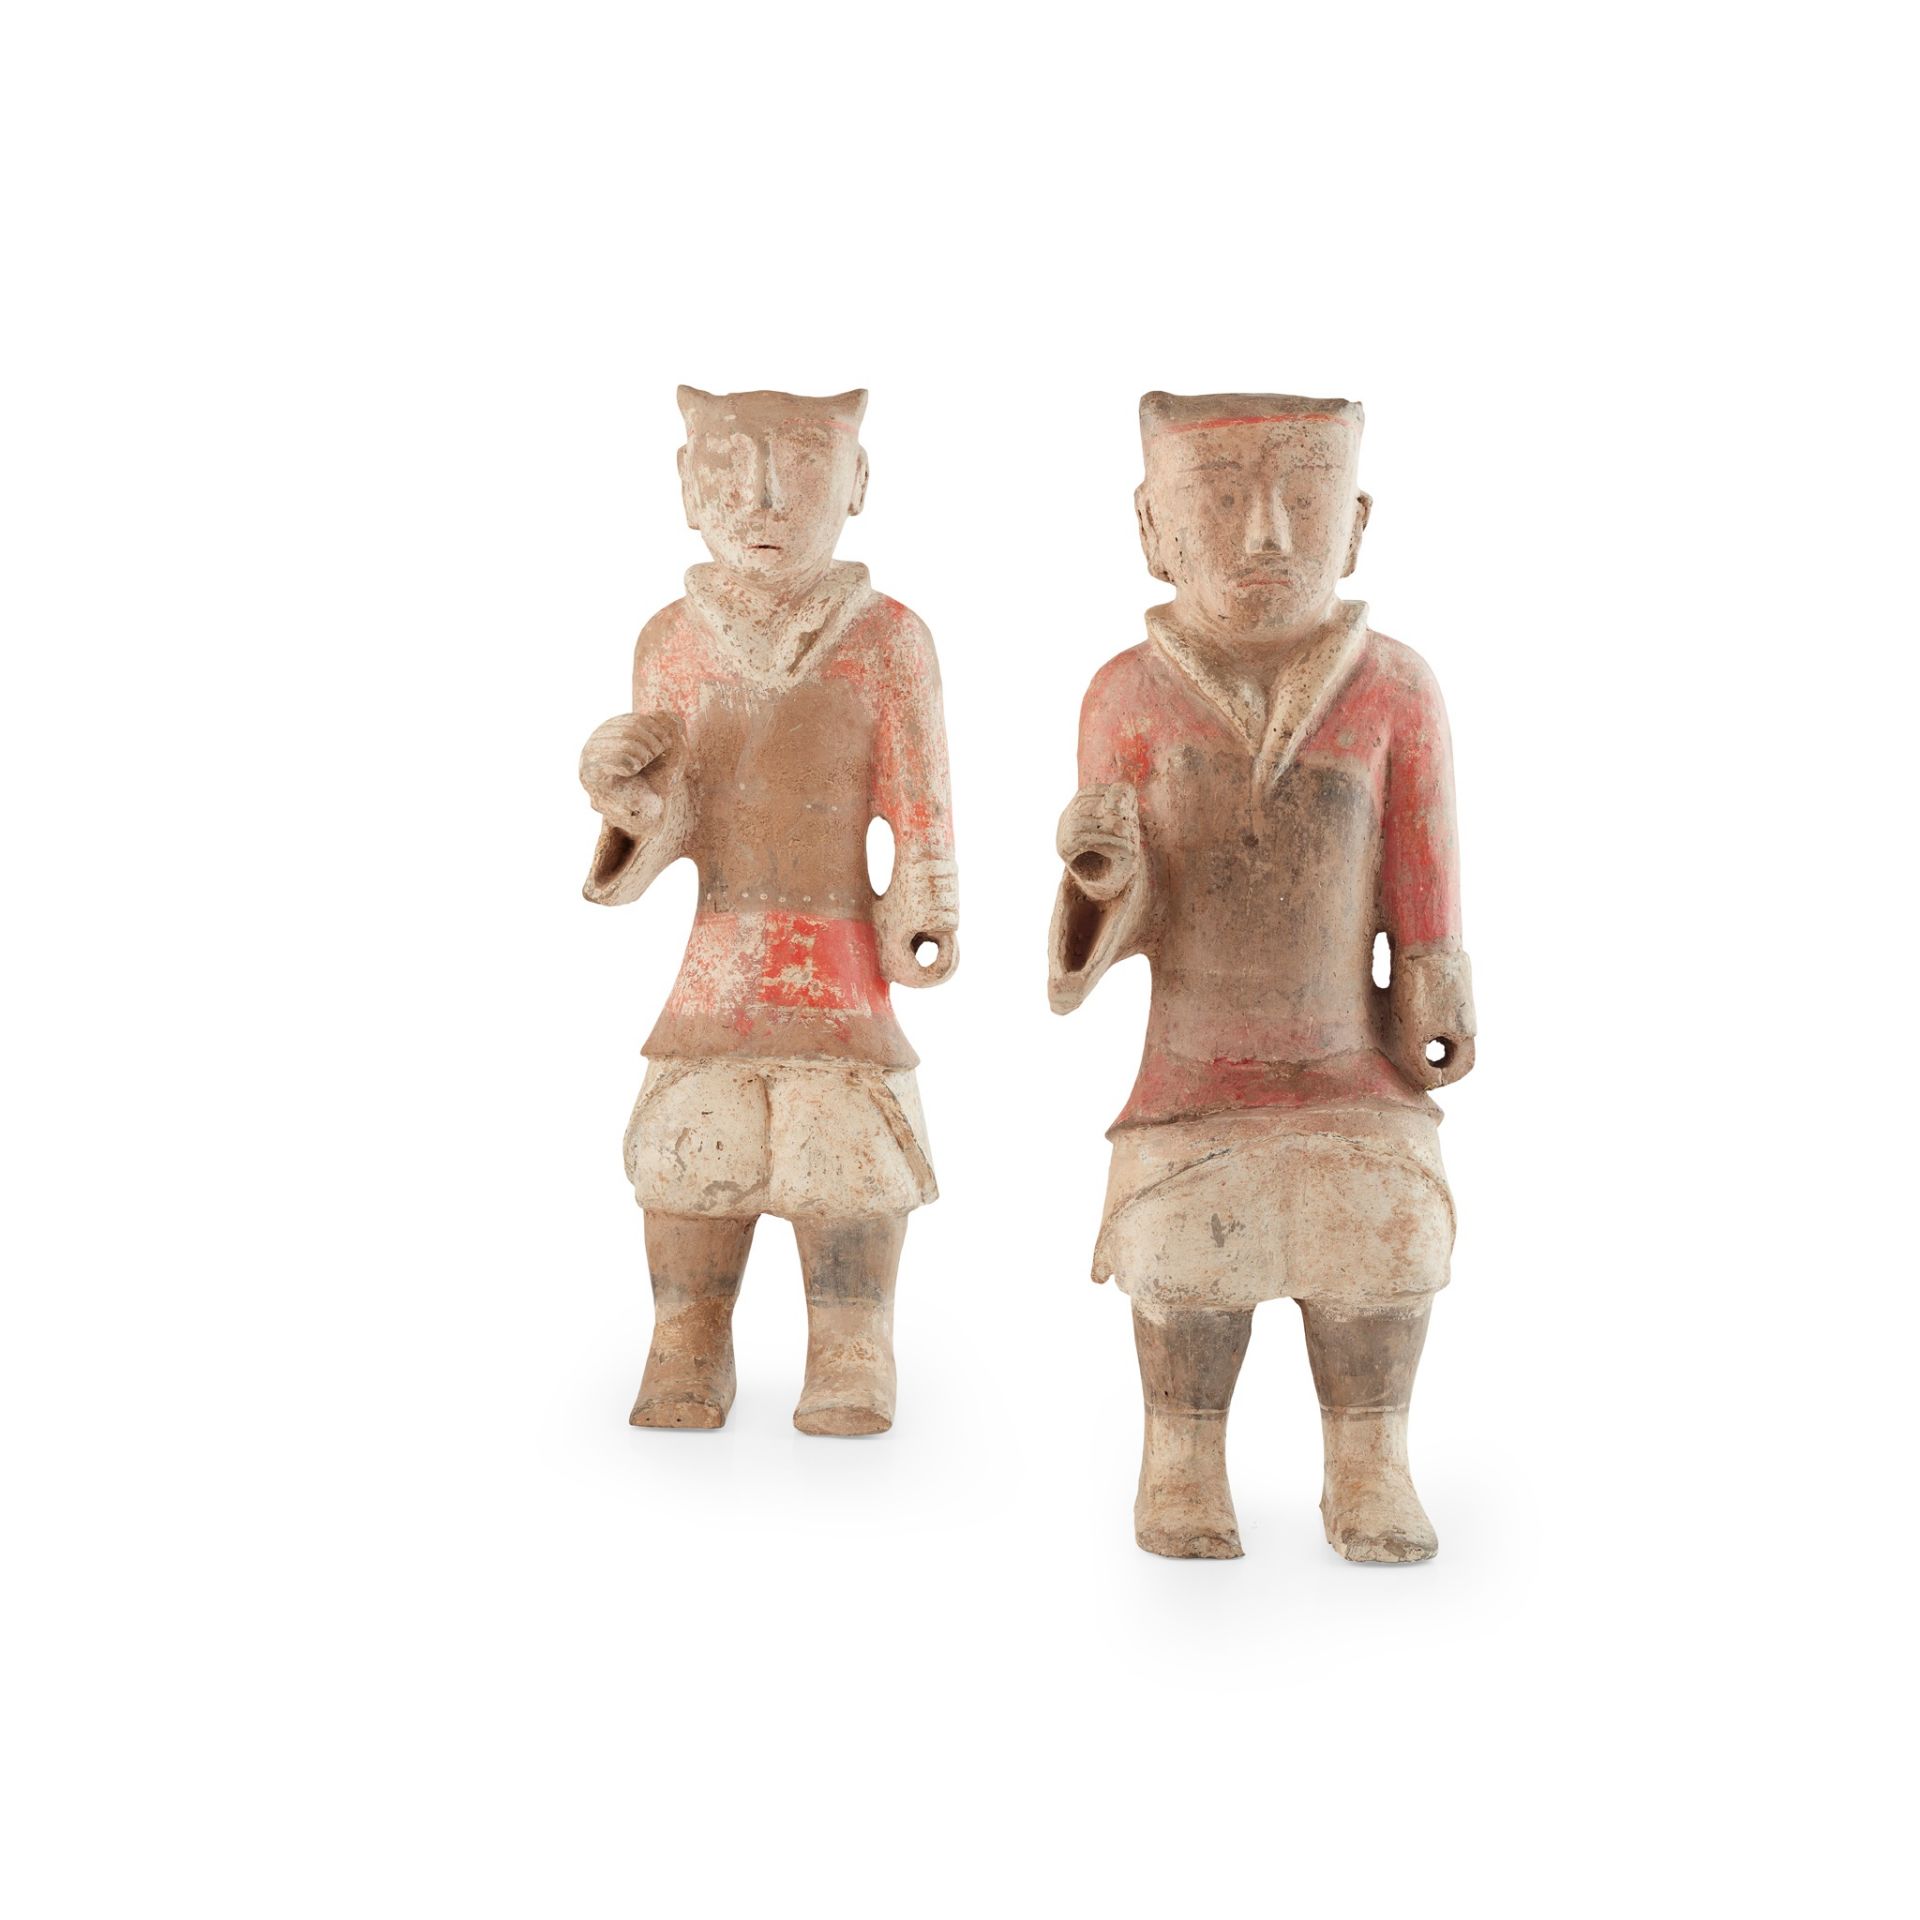 NEAR PAIR OF PAINTED POTTERY FIGURES HAN DYNASTY OR LATER - Image 2 of 2